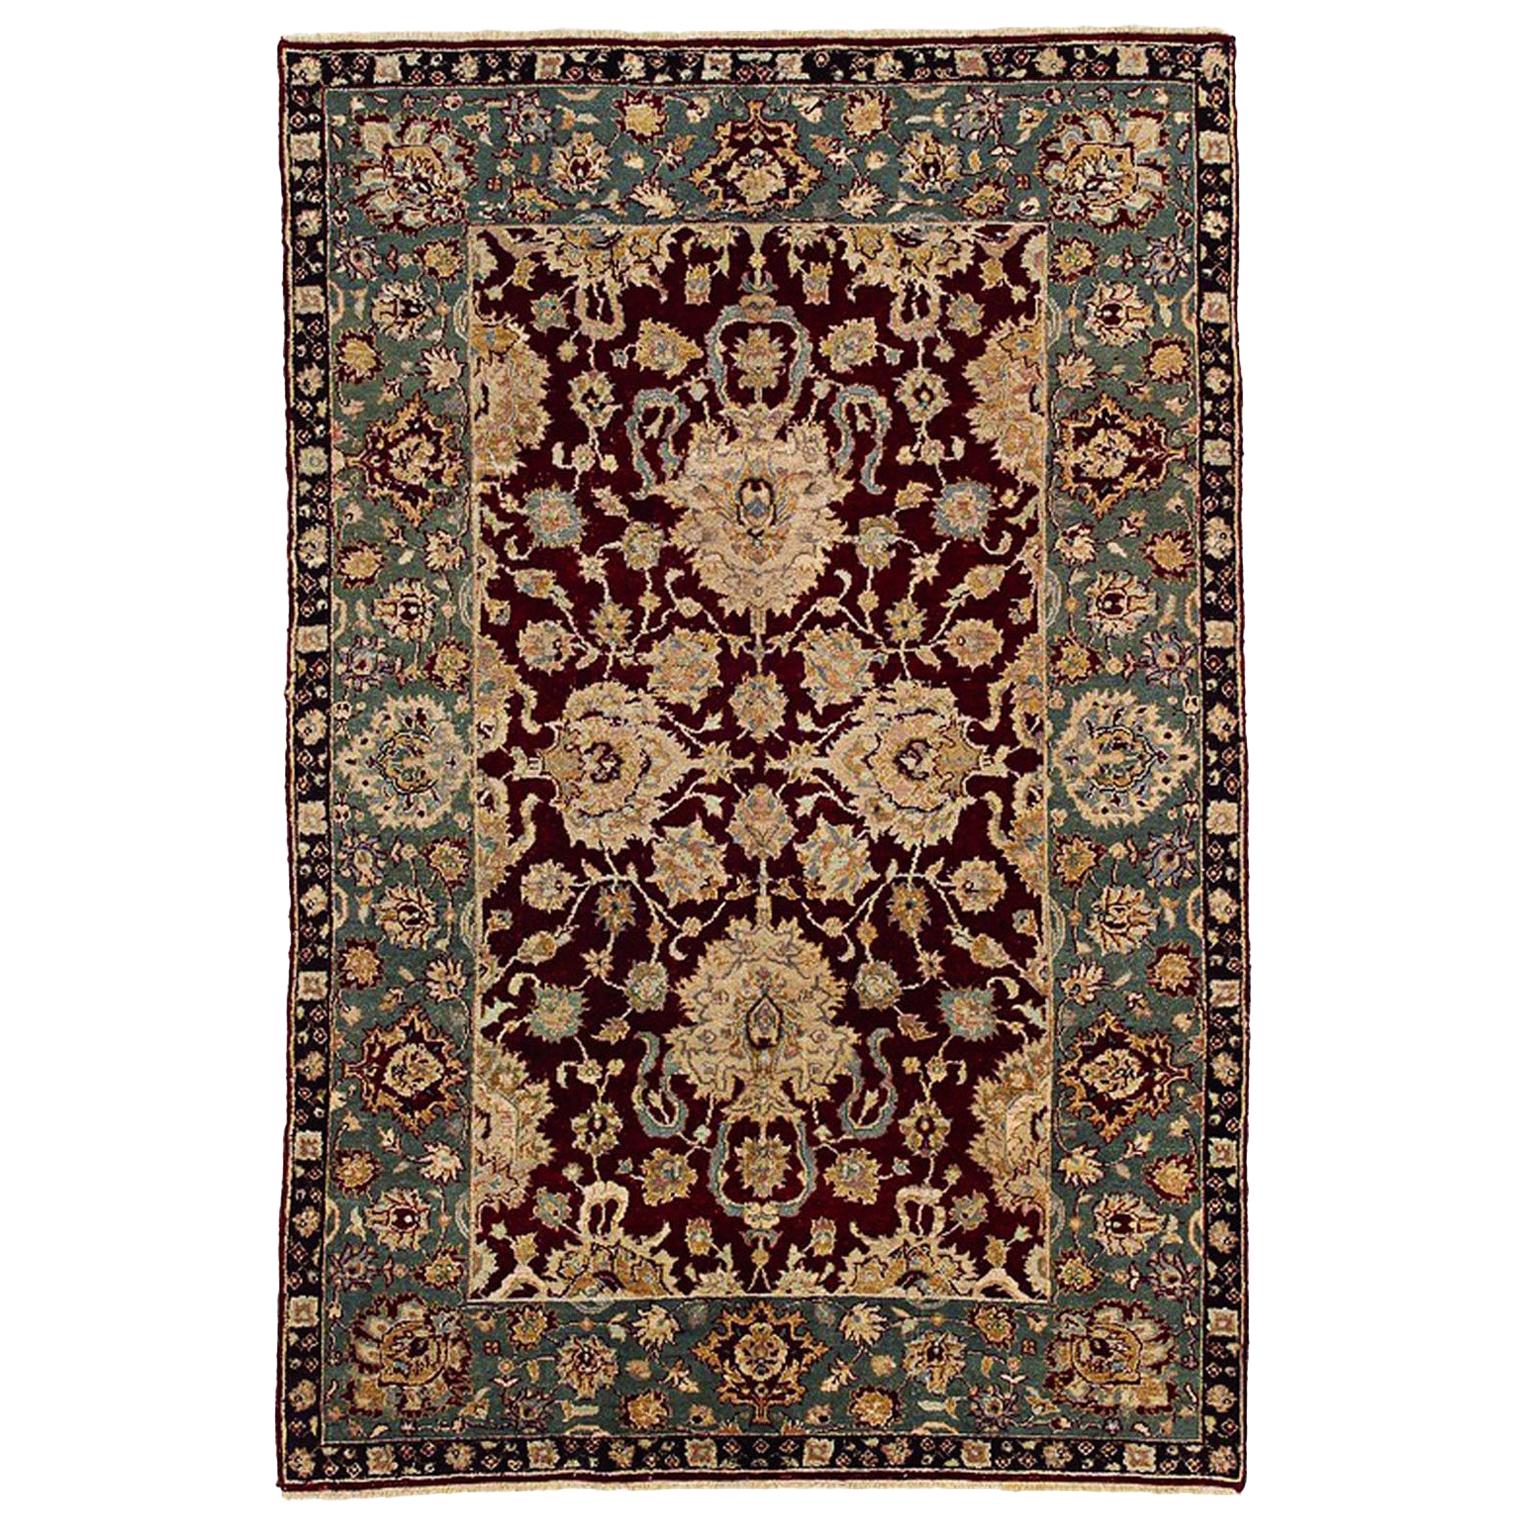 20th Century Green and Ruby Red in Wool Floreal Agra Indian Rug, circa 1900s For Sale